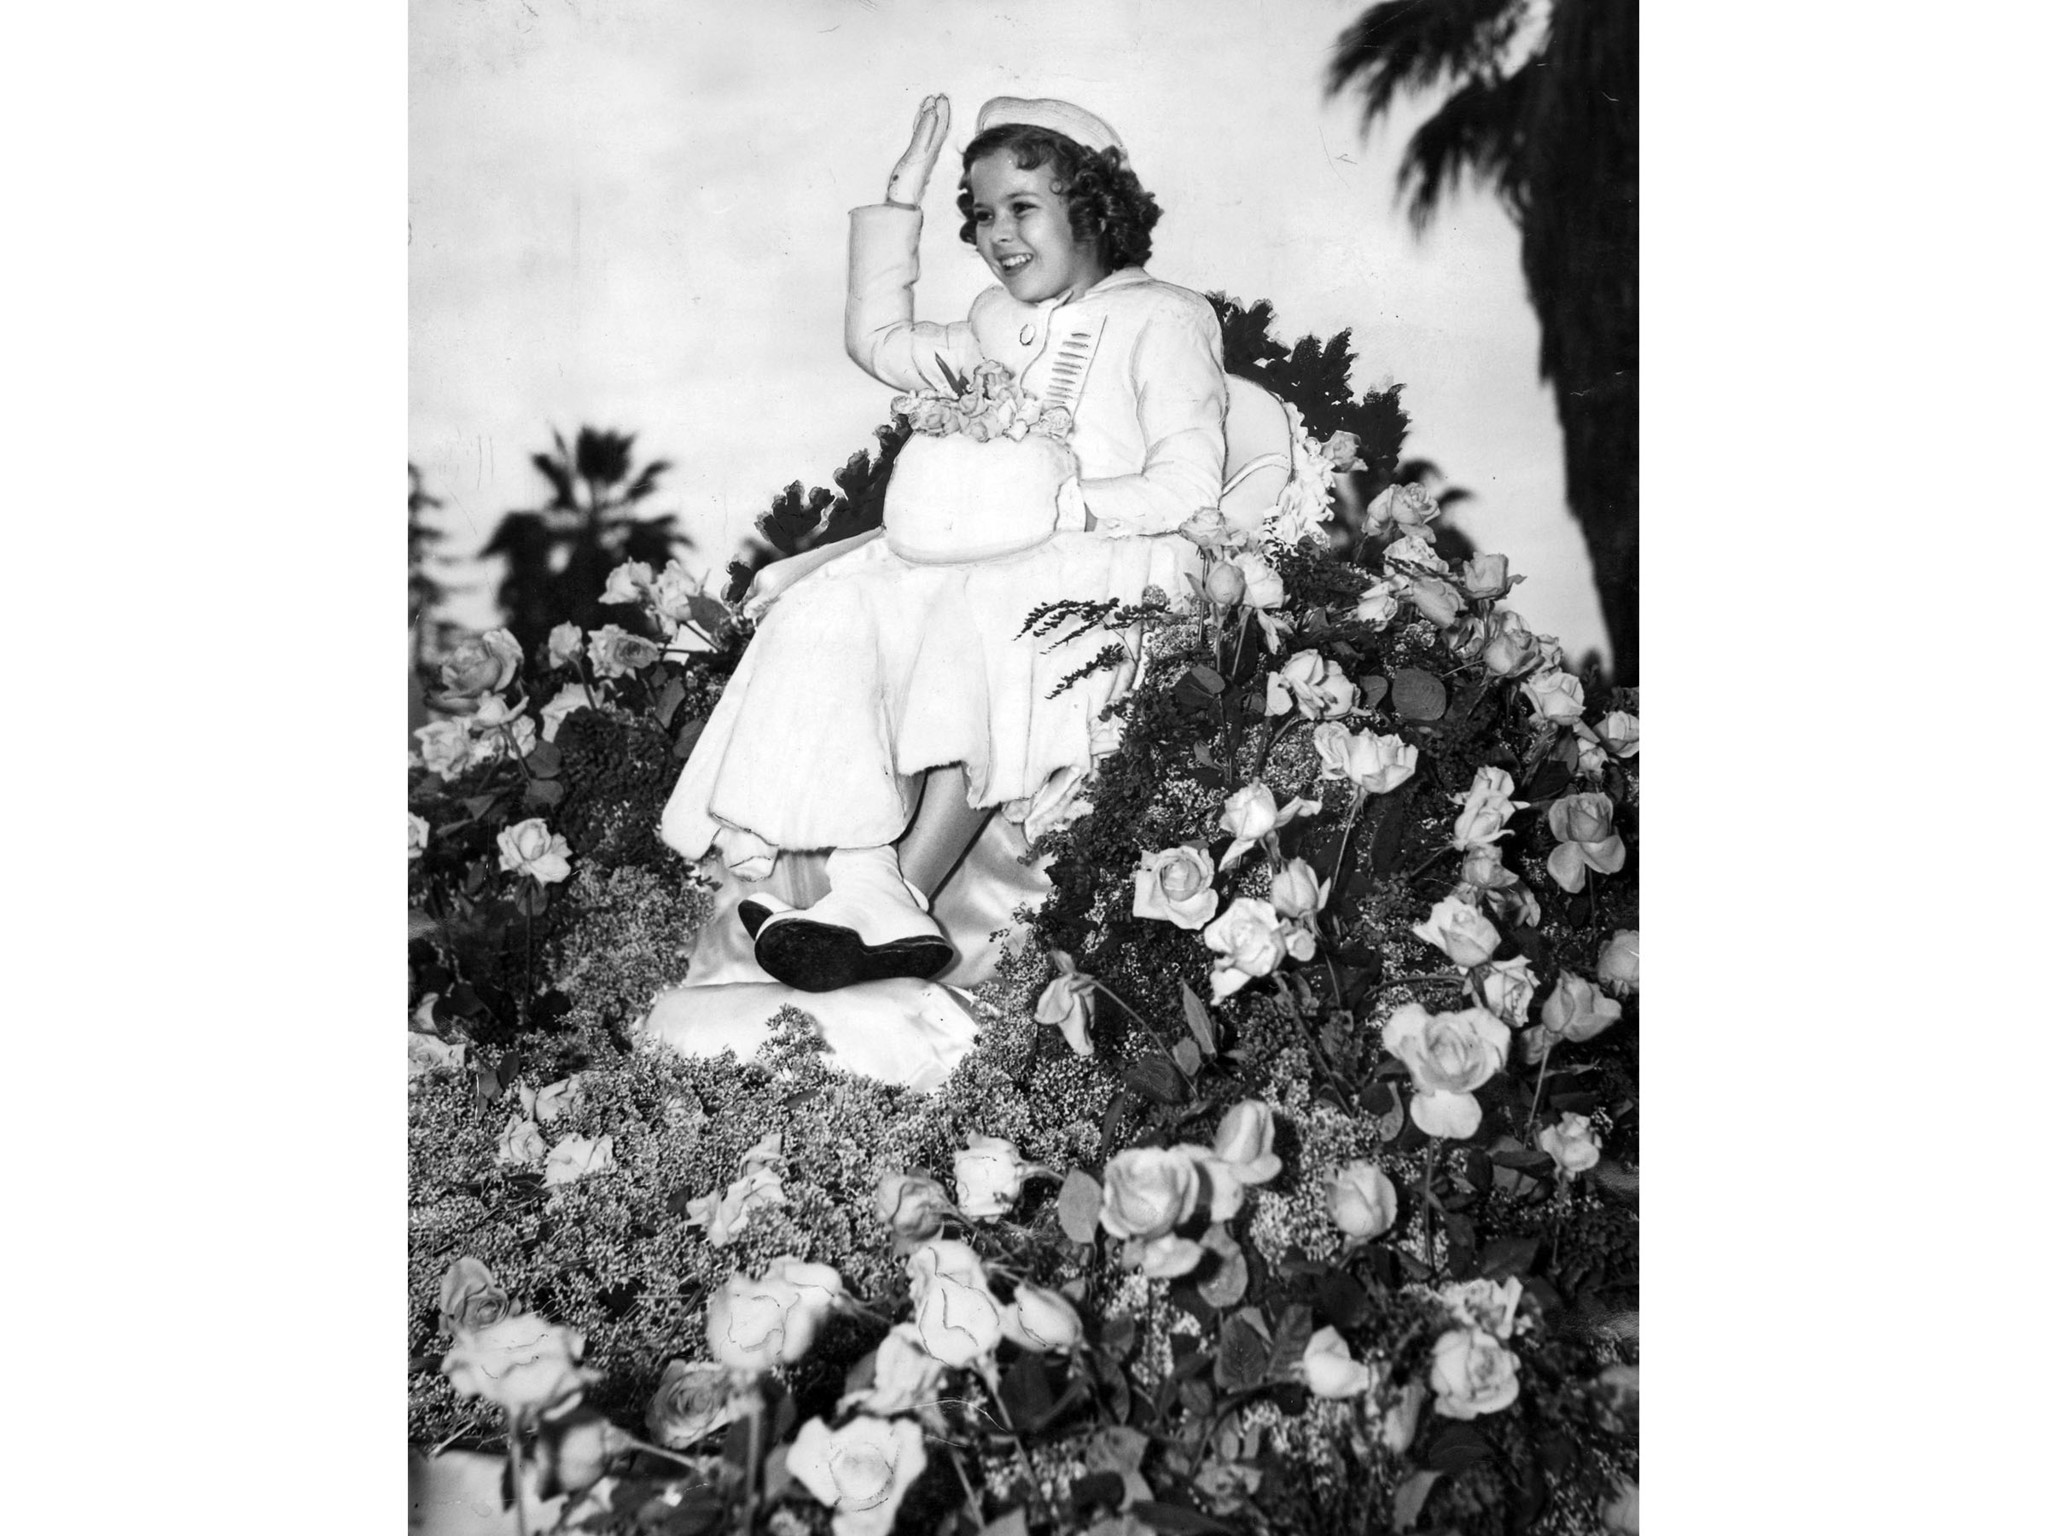 Jan. 2, 1939: Tournament of Roses parade grand marshal Shirley Temple rides on a float covered with